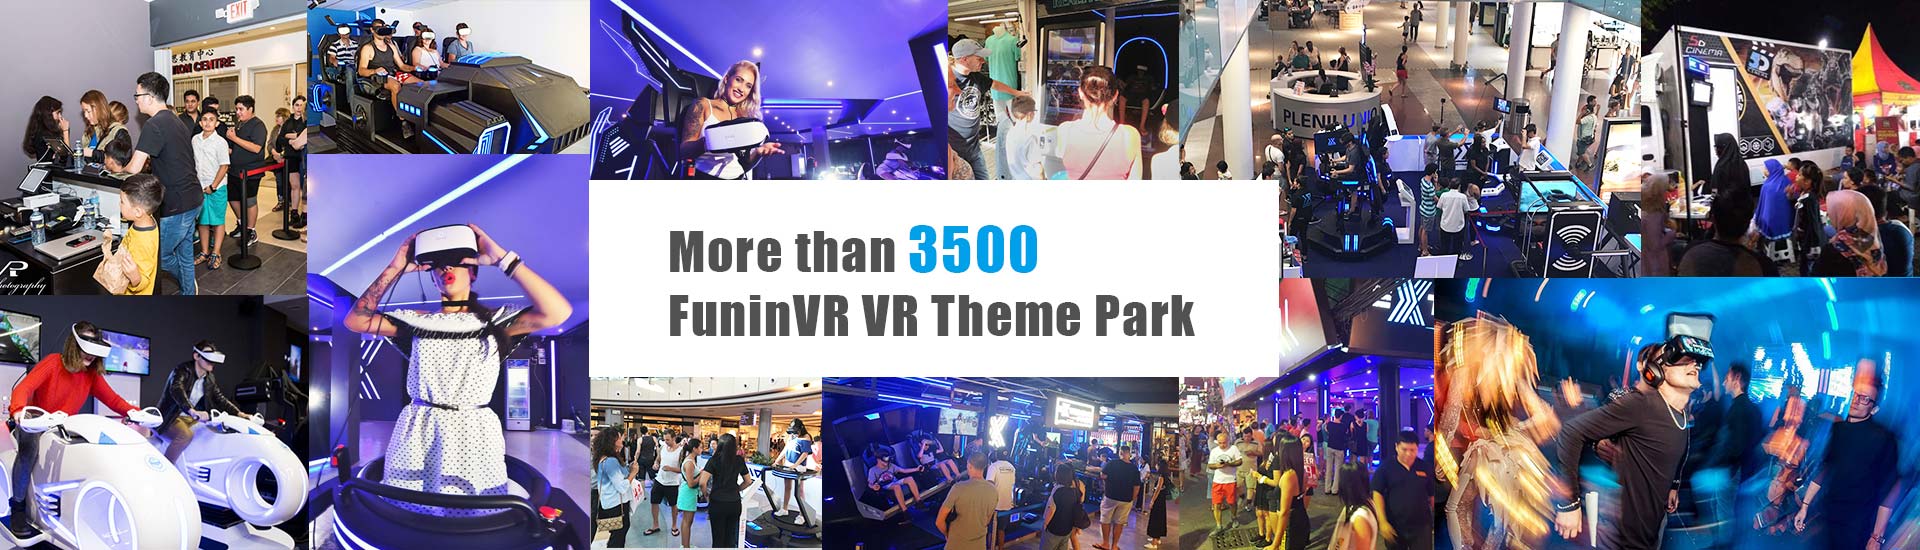 Enjoy Virtual Reality Entertainment in Germany VR Zone